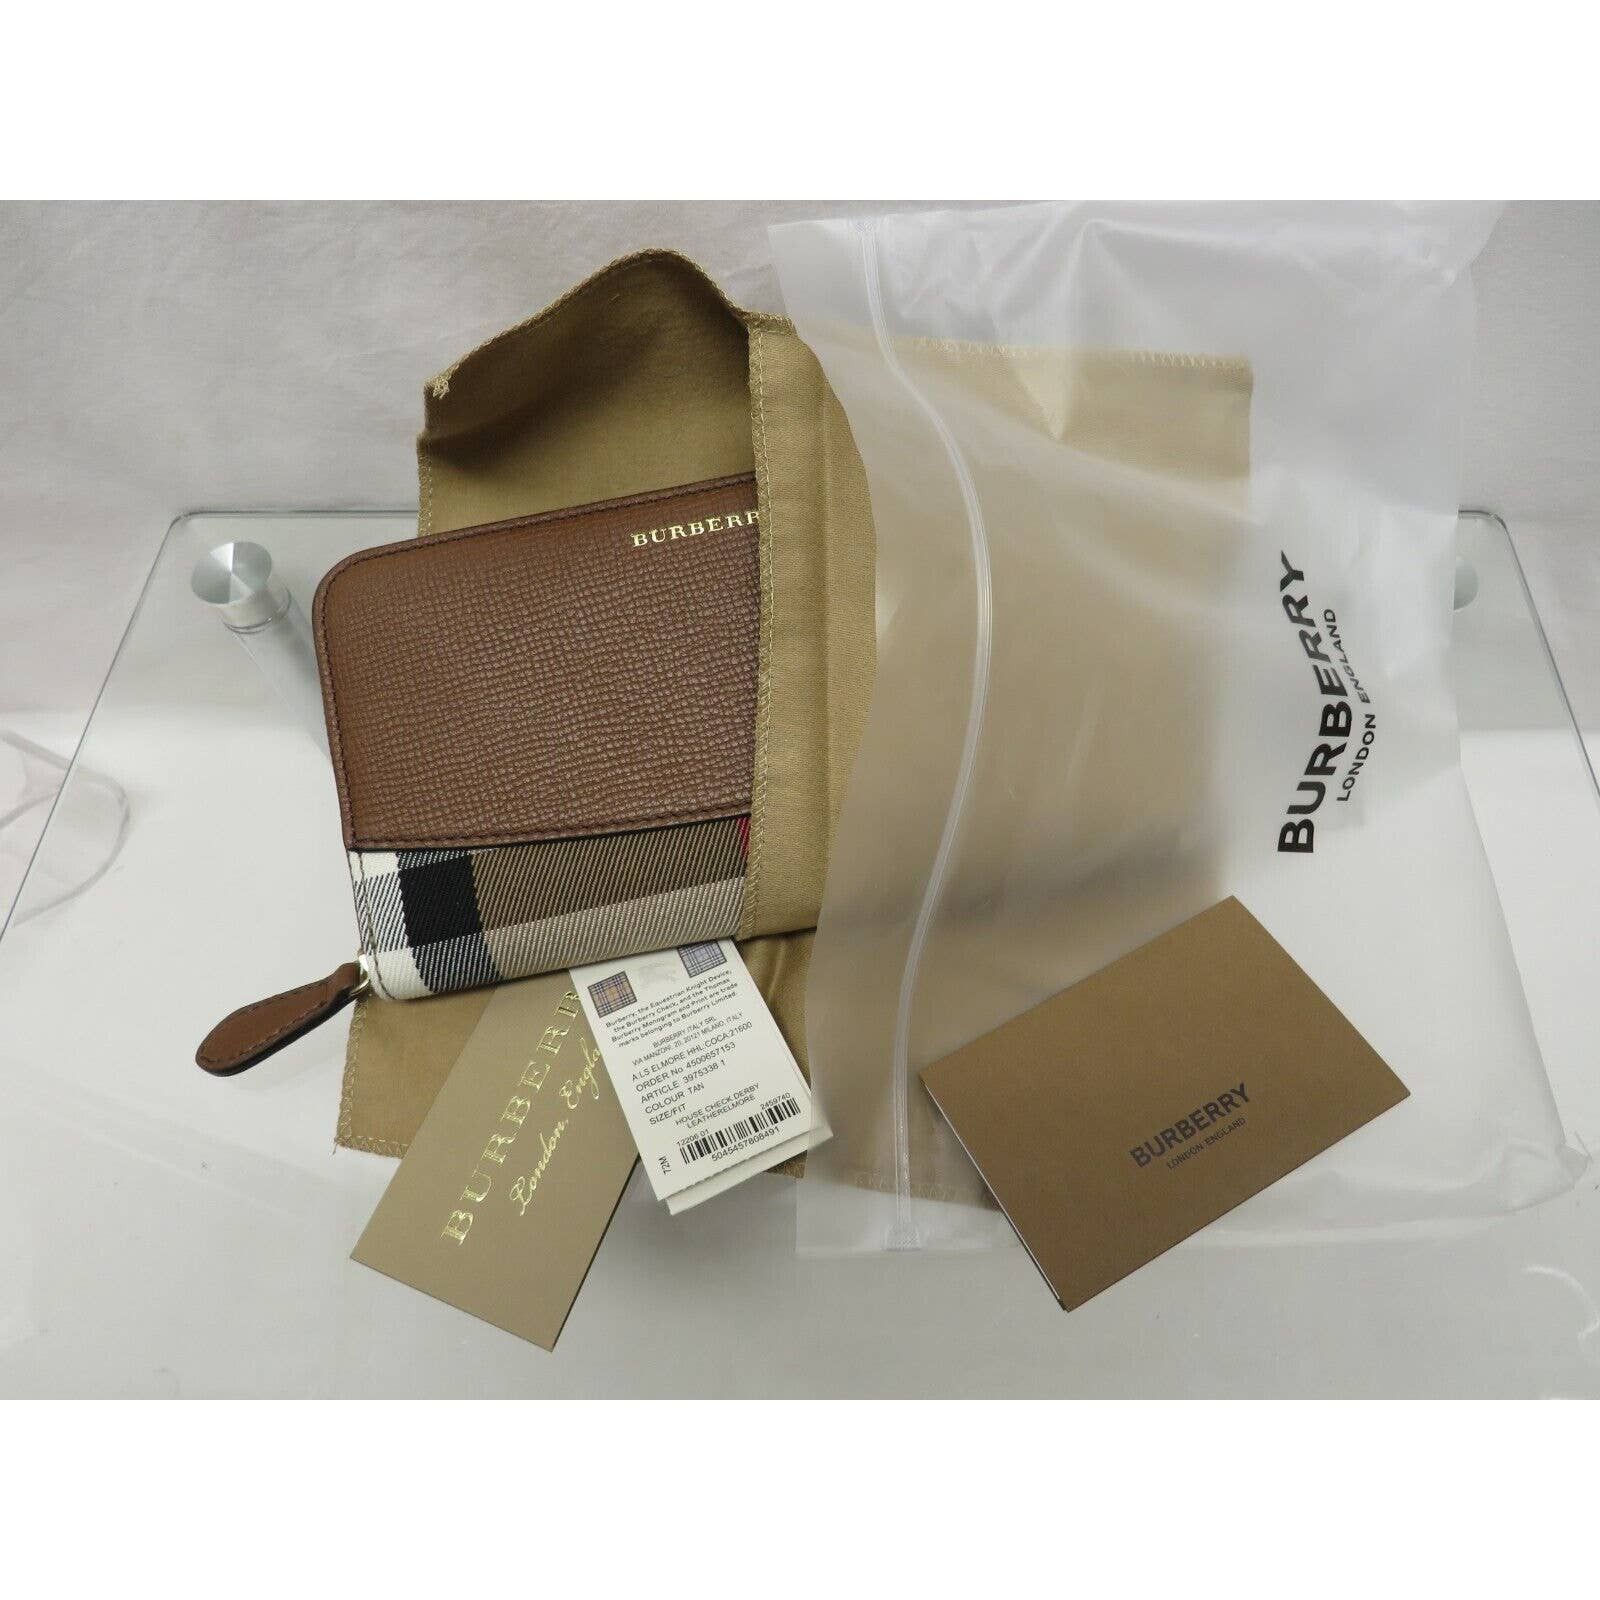 Burberry ELMORE BROWN HOUSE CHECK LEATHER ZIP LOGO CLUTCH WALLET Size ONE SIZE - 8 Thumbnail